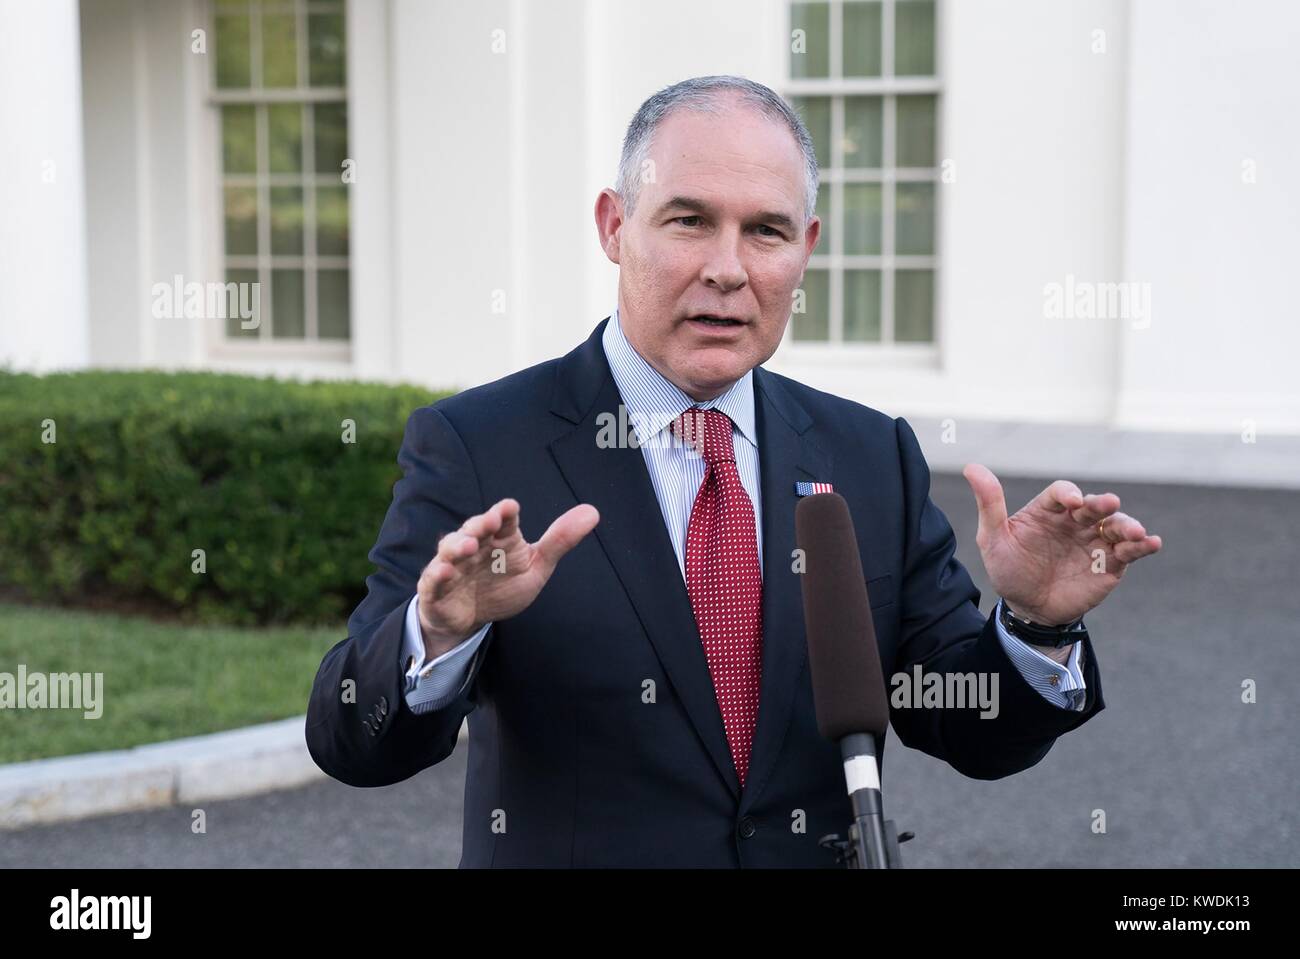 Environmental Protection Agency Administrator, Scott Pruitt, July 25, 2017. At the EPA, Pruitt has rescinded environmental regulation of previous administrations. He has stated that scientific conclusions on global warning and climate change are exaggerated (BSLOC 2017 18 140) Stock Photo